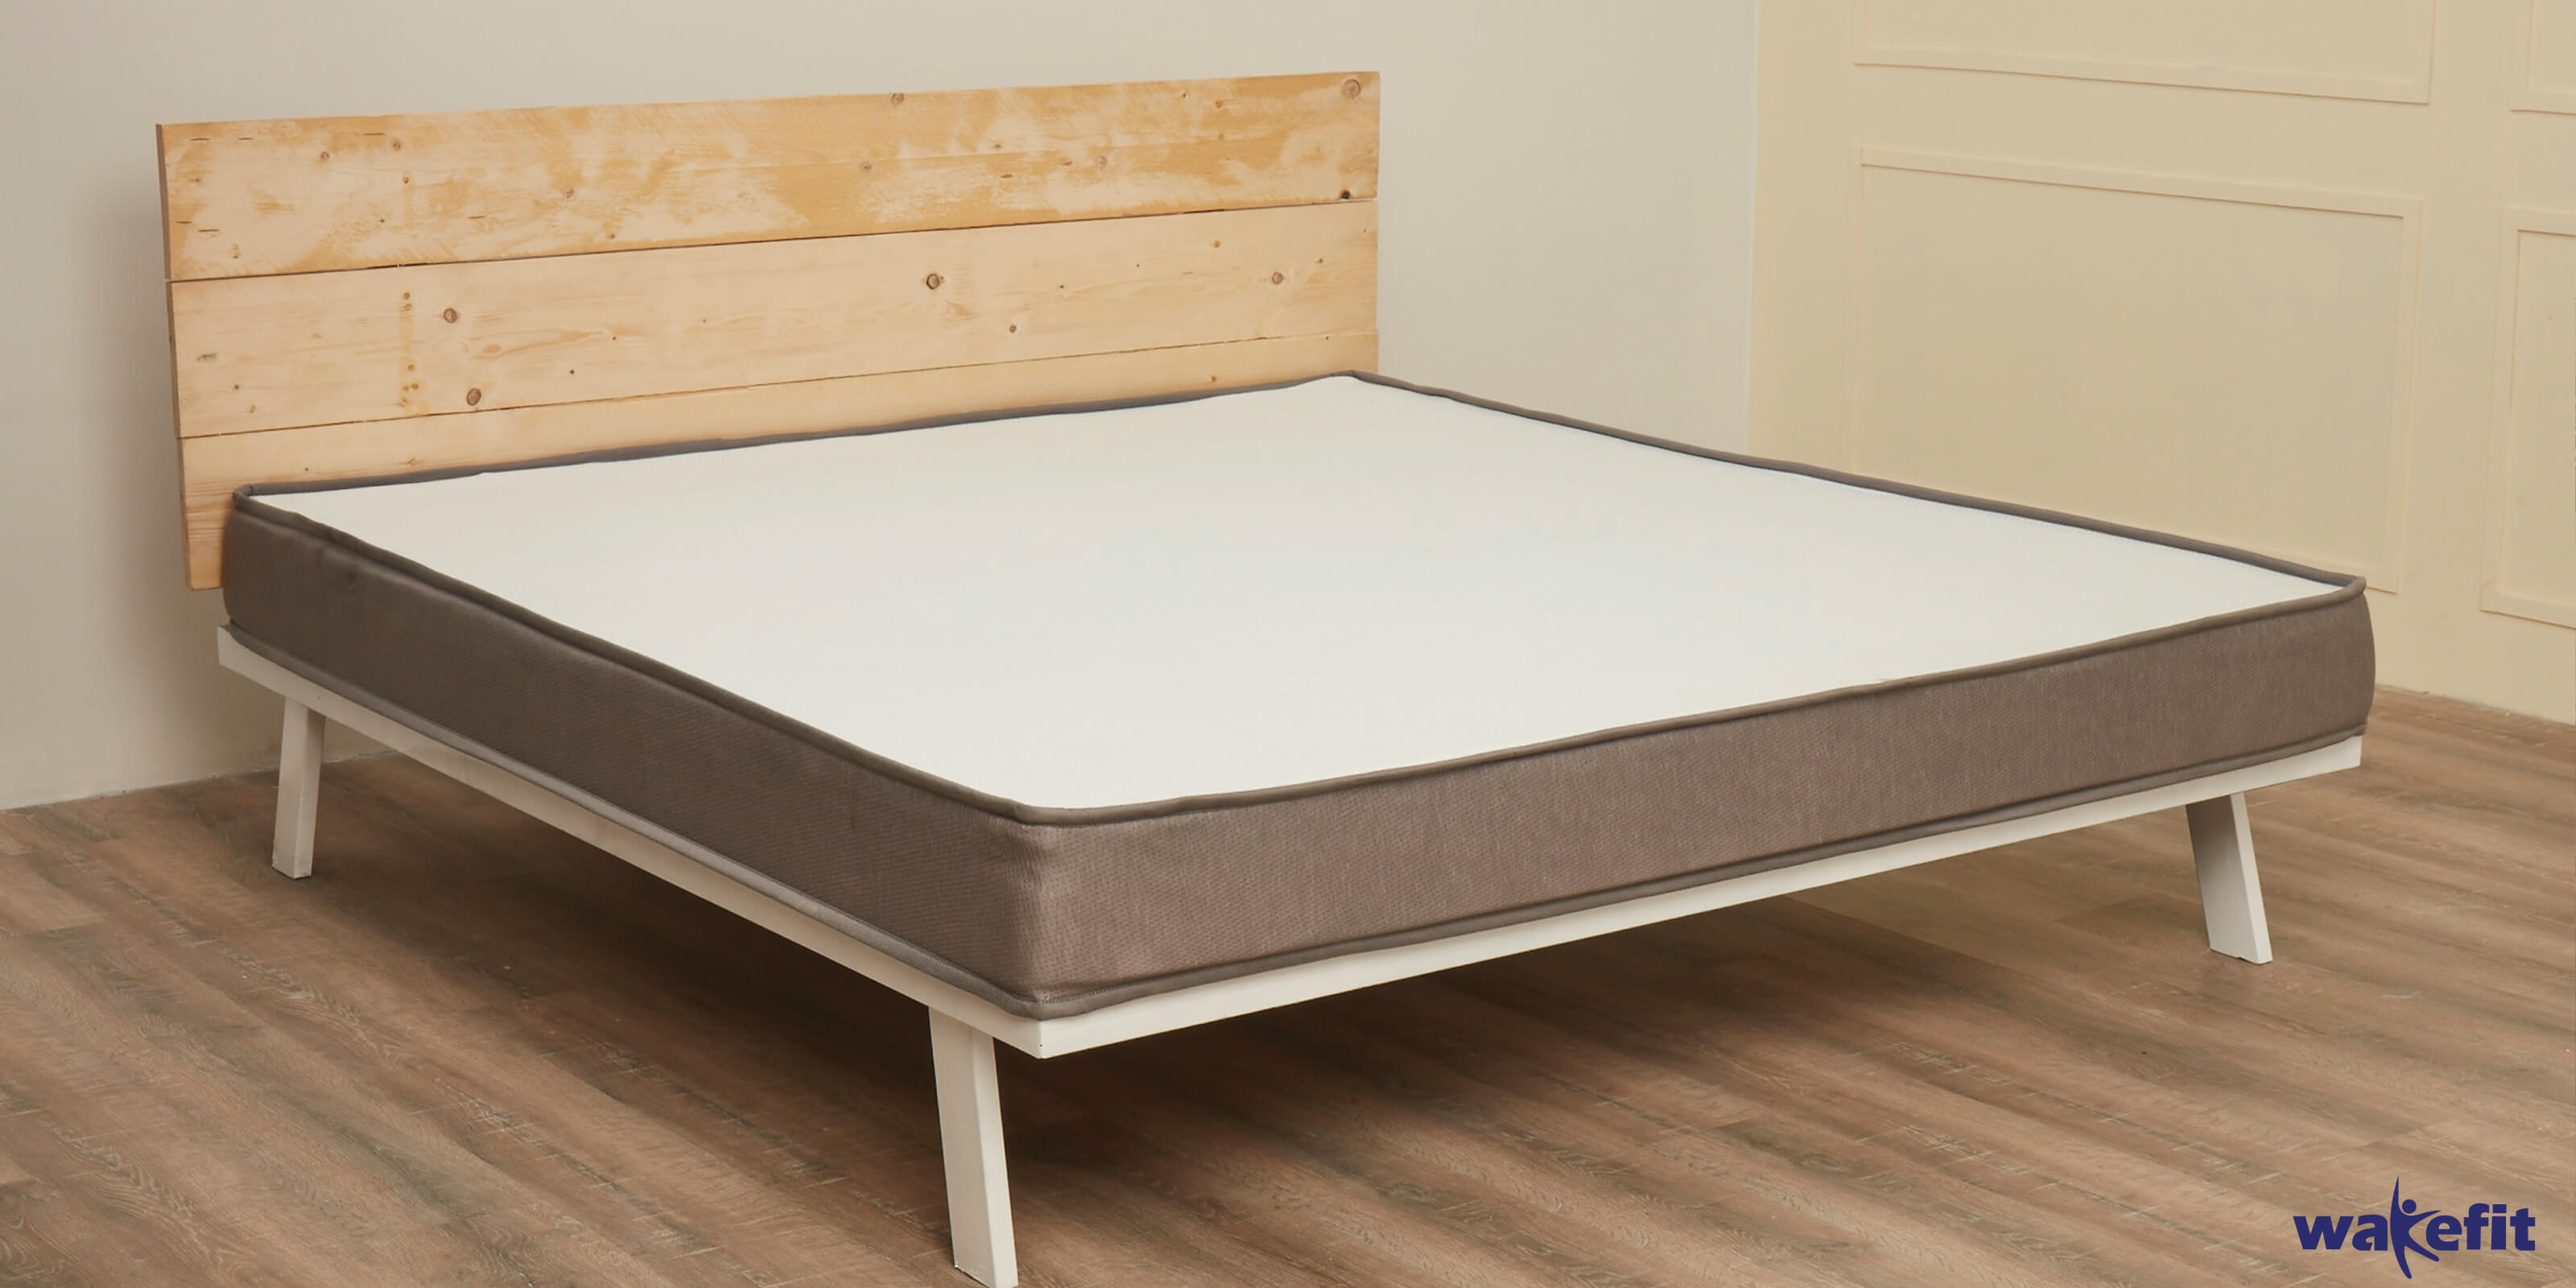 Luxury King Size Bed Wholesale Offers, Save 67% | jlcatj.gob.mx